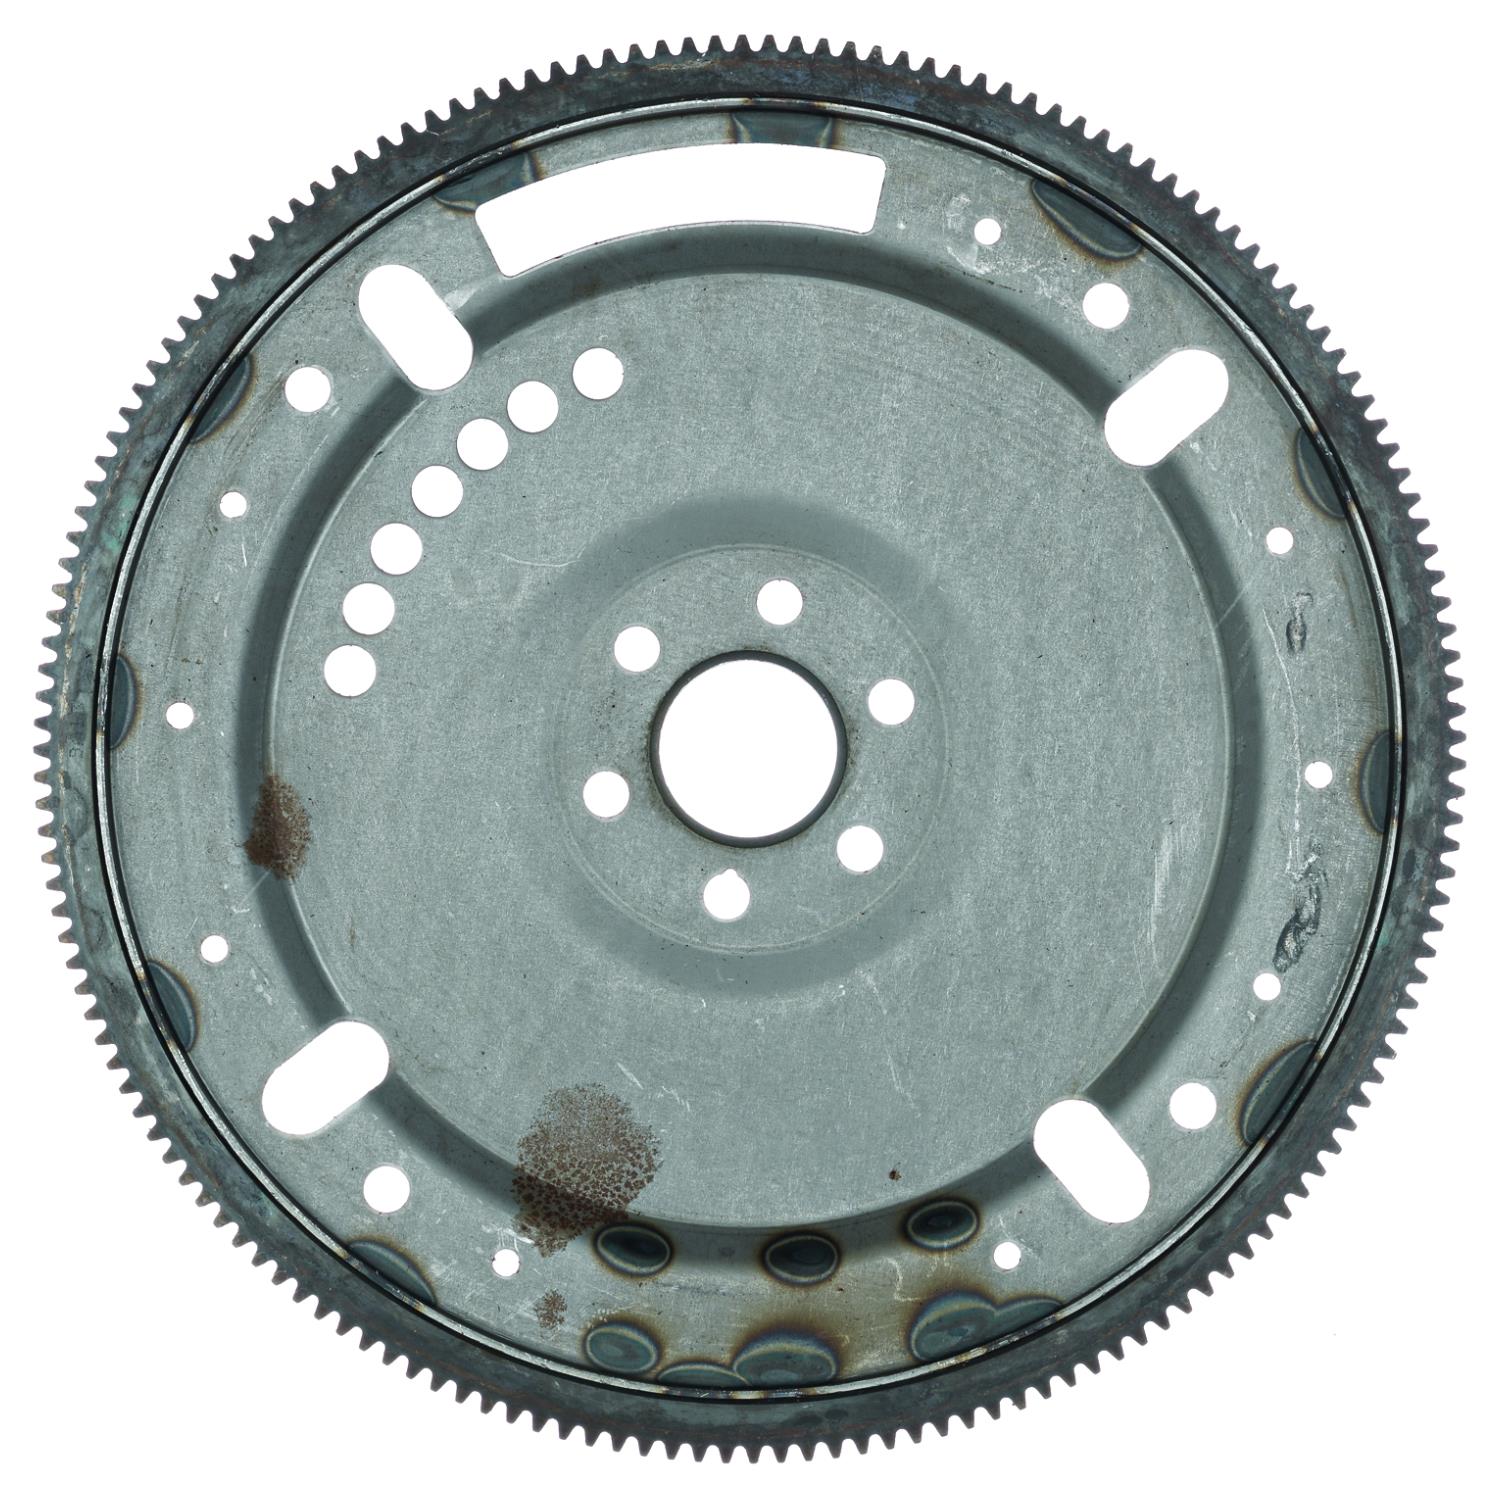 OE-Style Flexplate 1982-1992 Ford Bronco 5.0L V8, 1980-1988 Ford Mustang 5.0L V8, For Automatic Transmissions